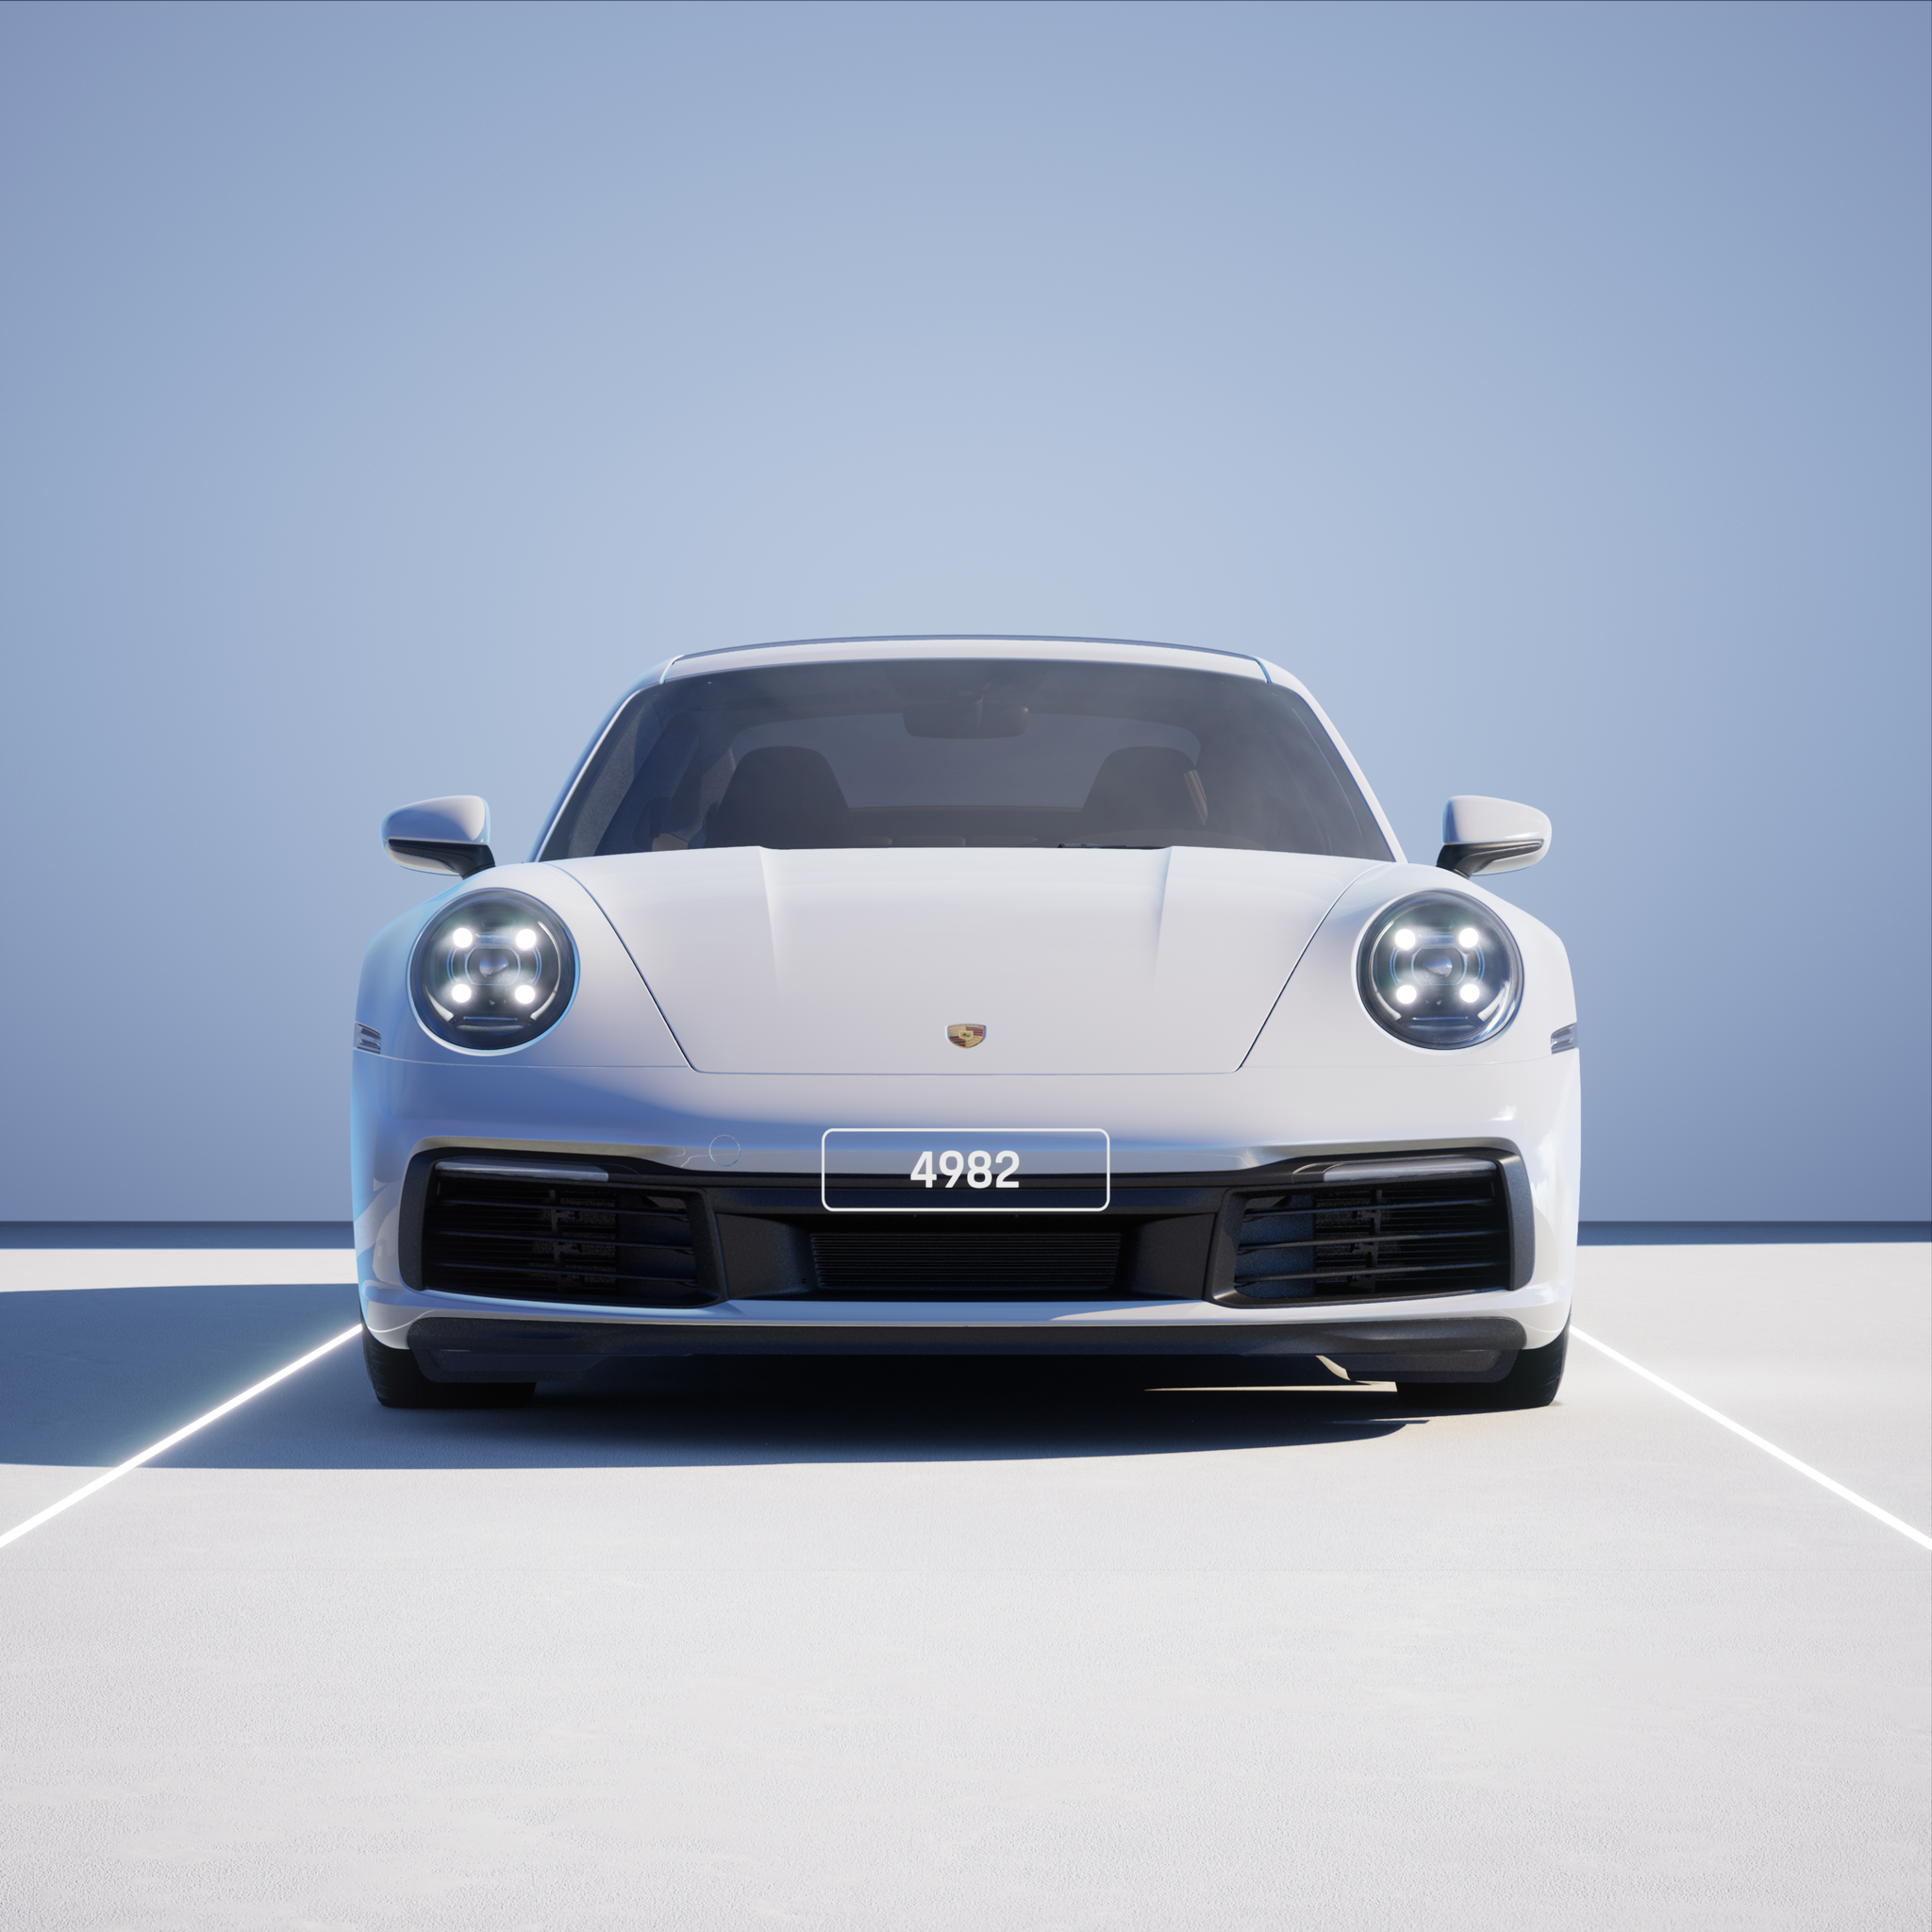 The PORSCHΞ 911 4982 image in phase